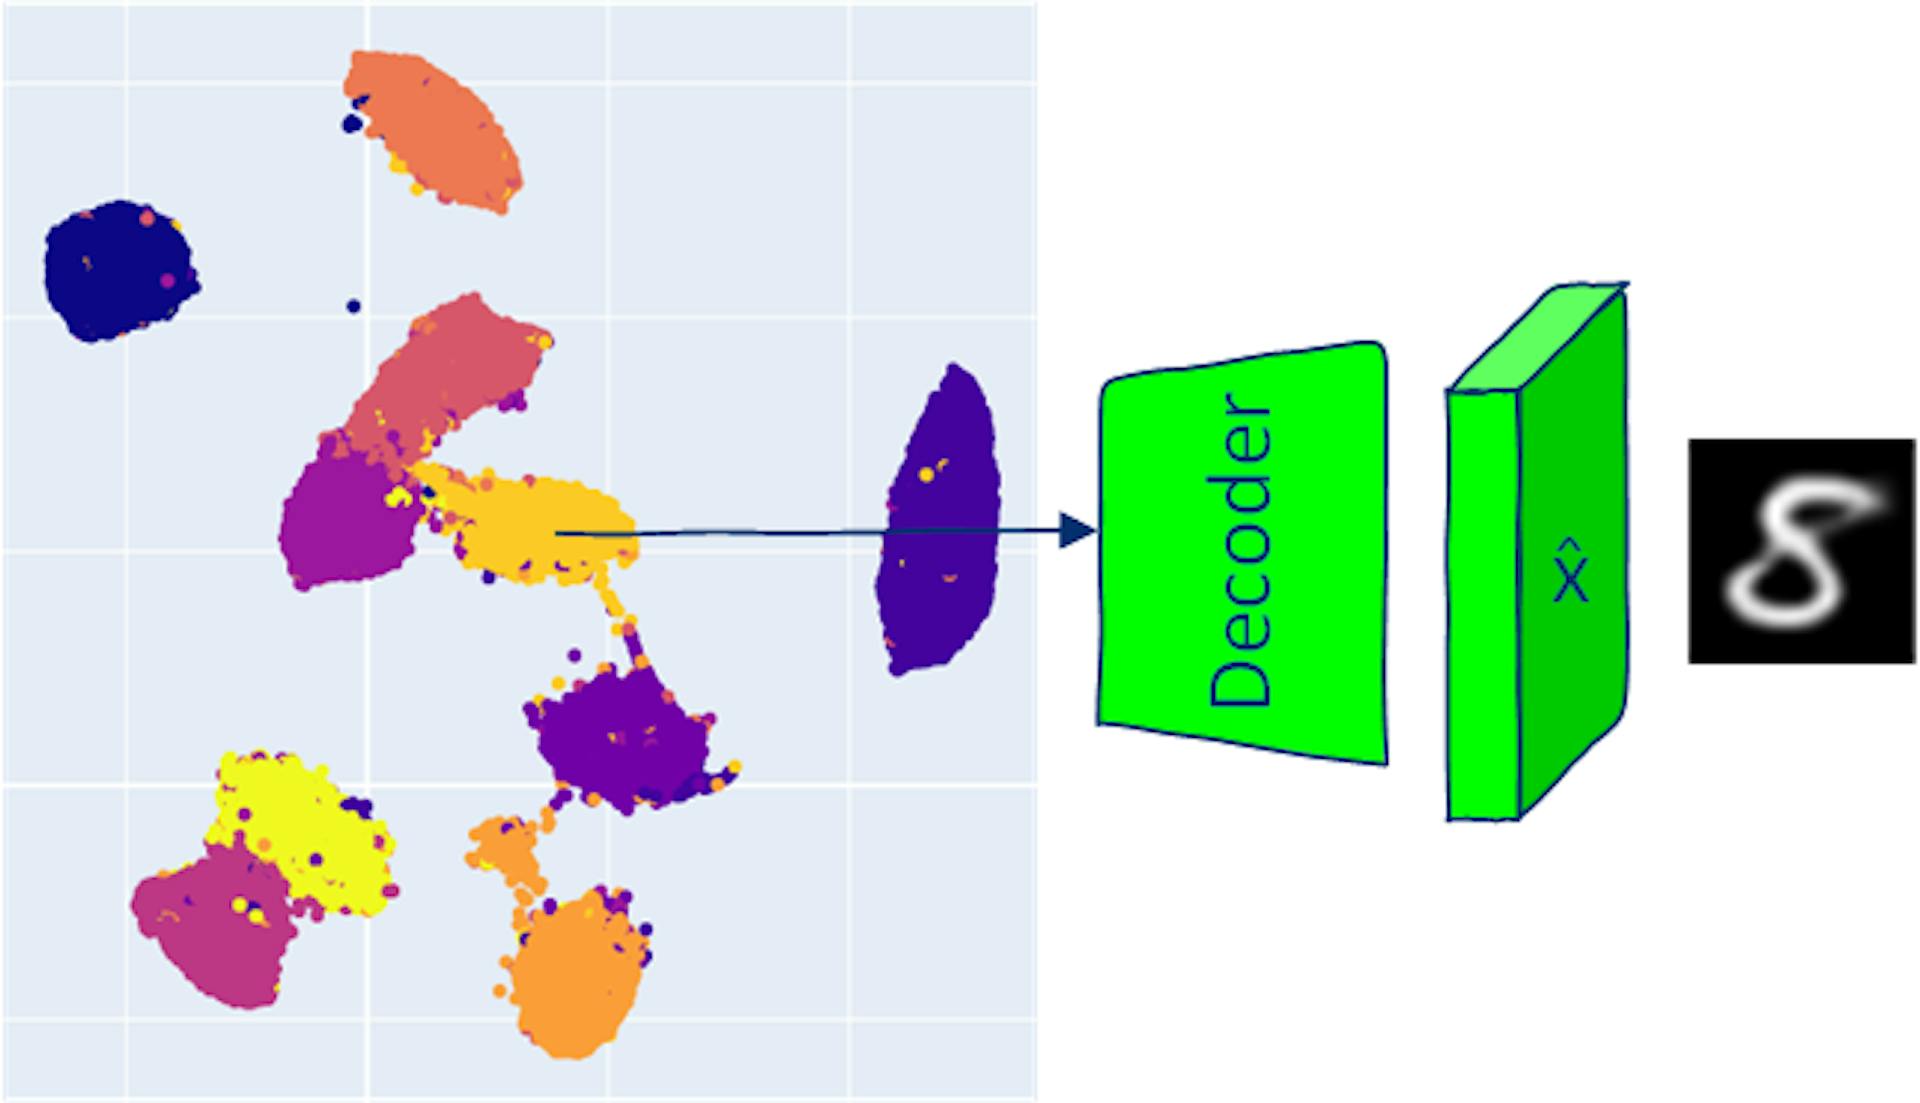 Sampling from the distribution and passing the sampled vector to the decoder allows the generating of new data